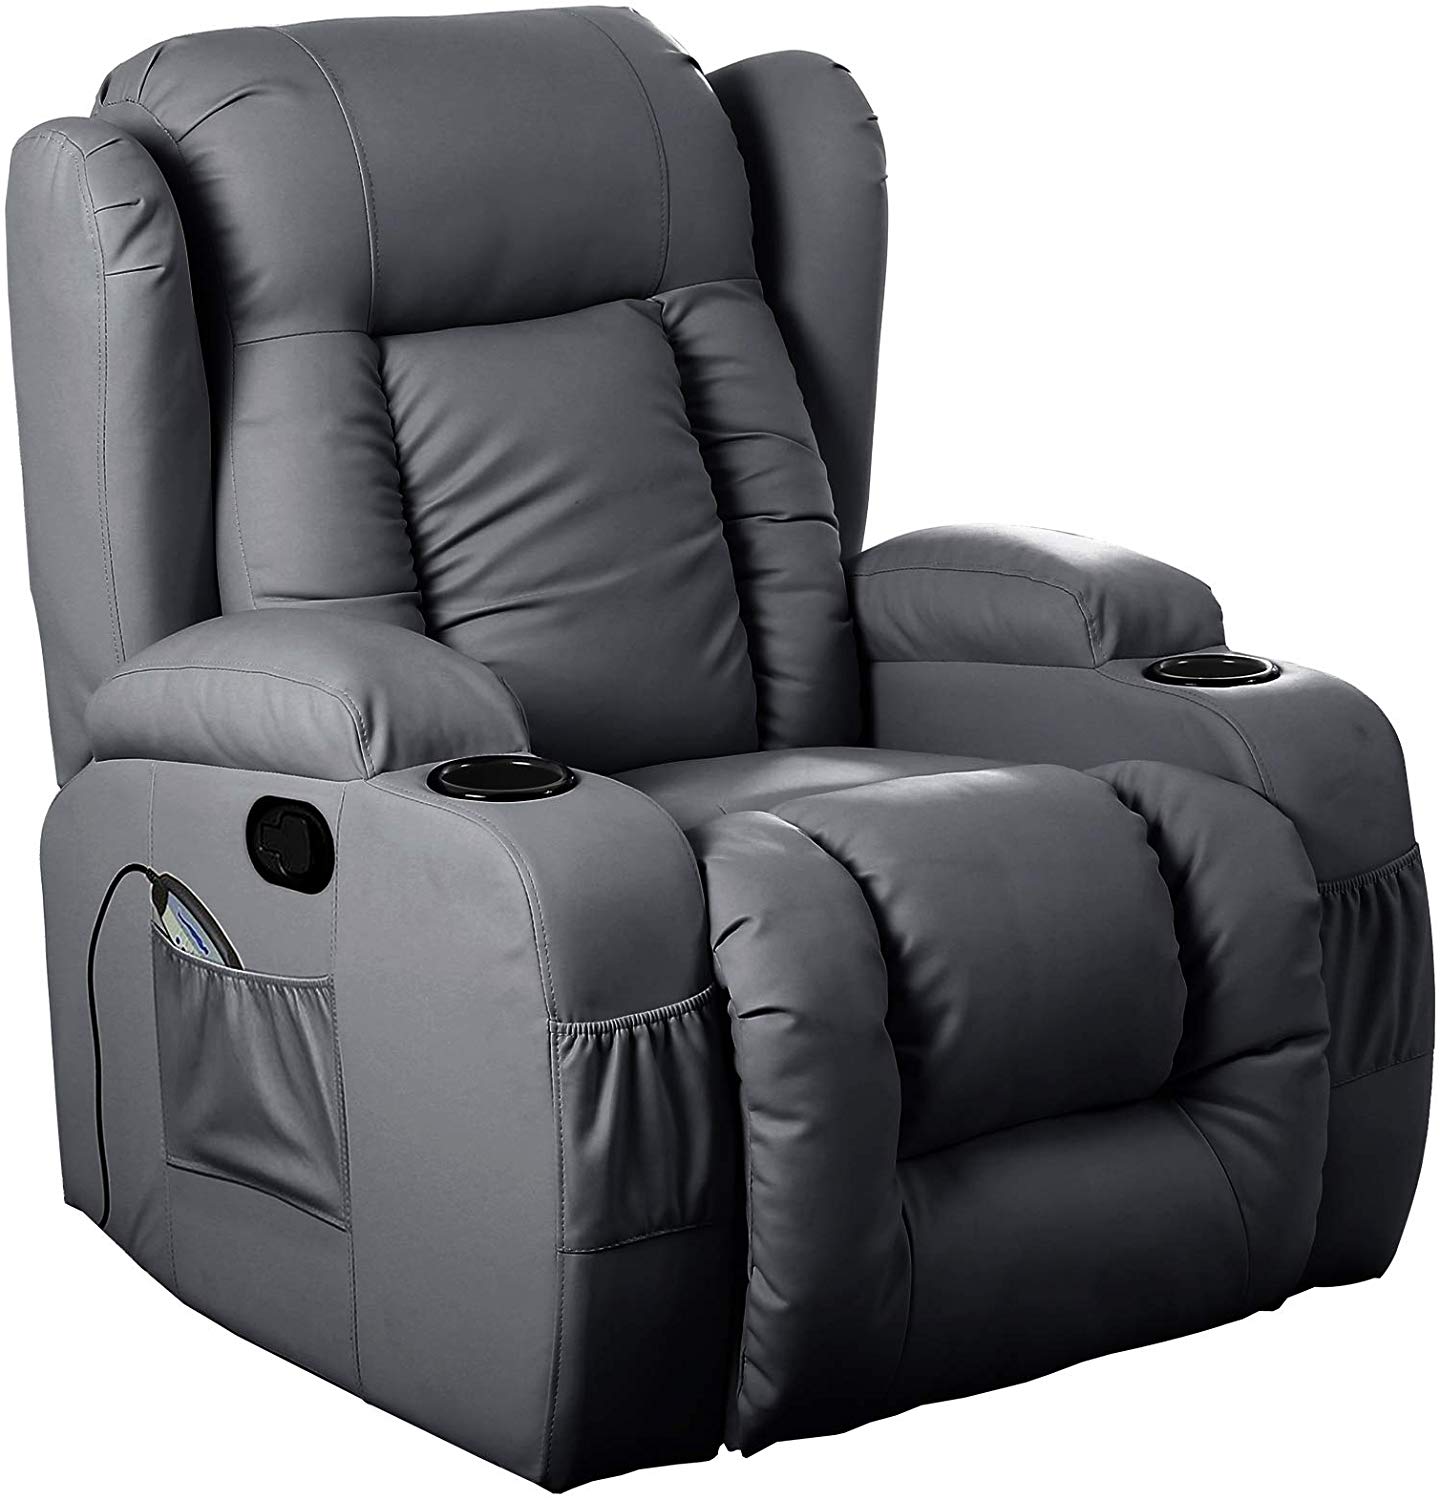 10 IN 1 WINGED LEATHER RECLINER CHAIR ROCKING MASSAGE SWIVEL HEATED GAMING ARMCHAIR